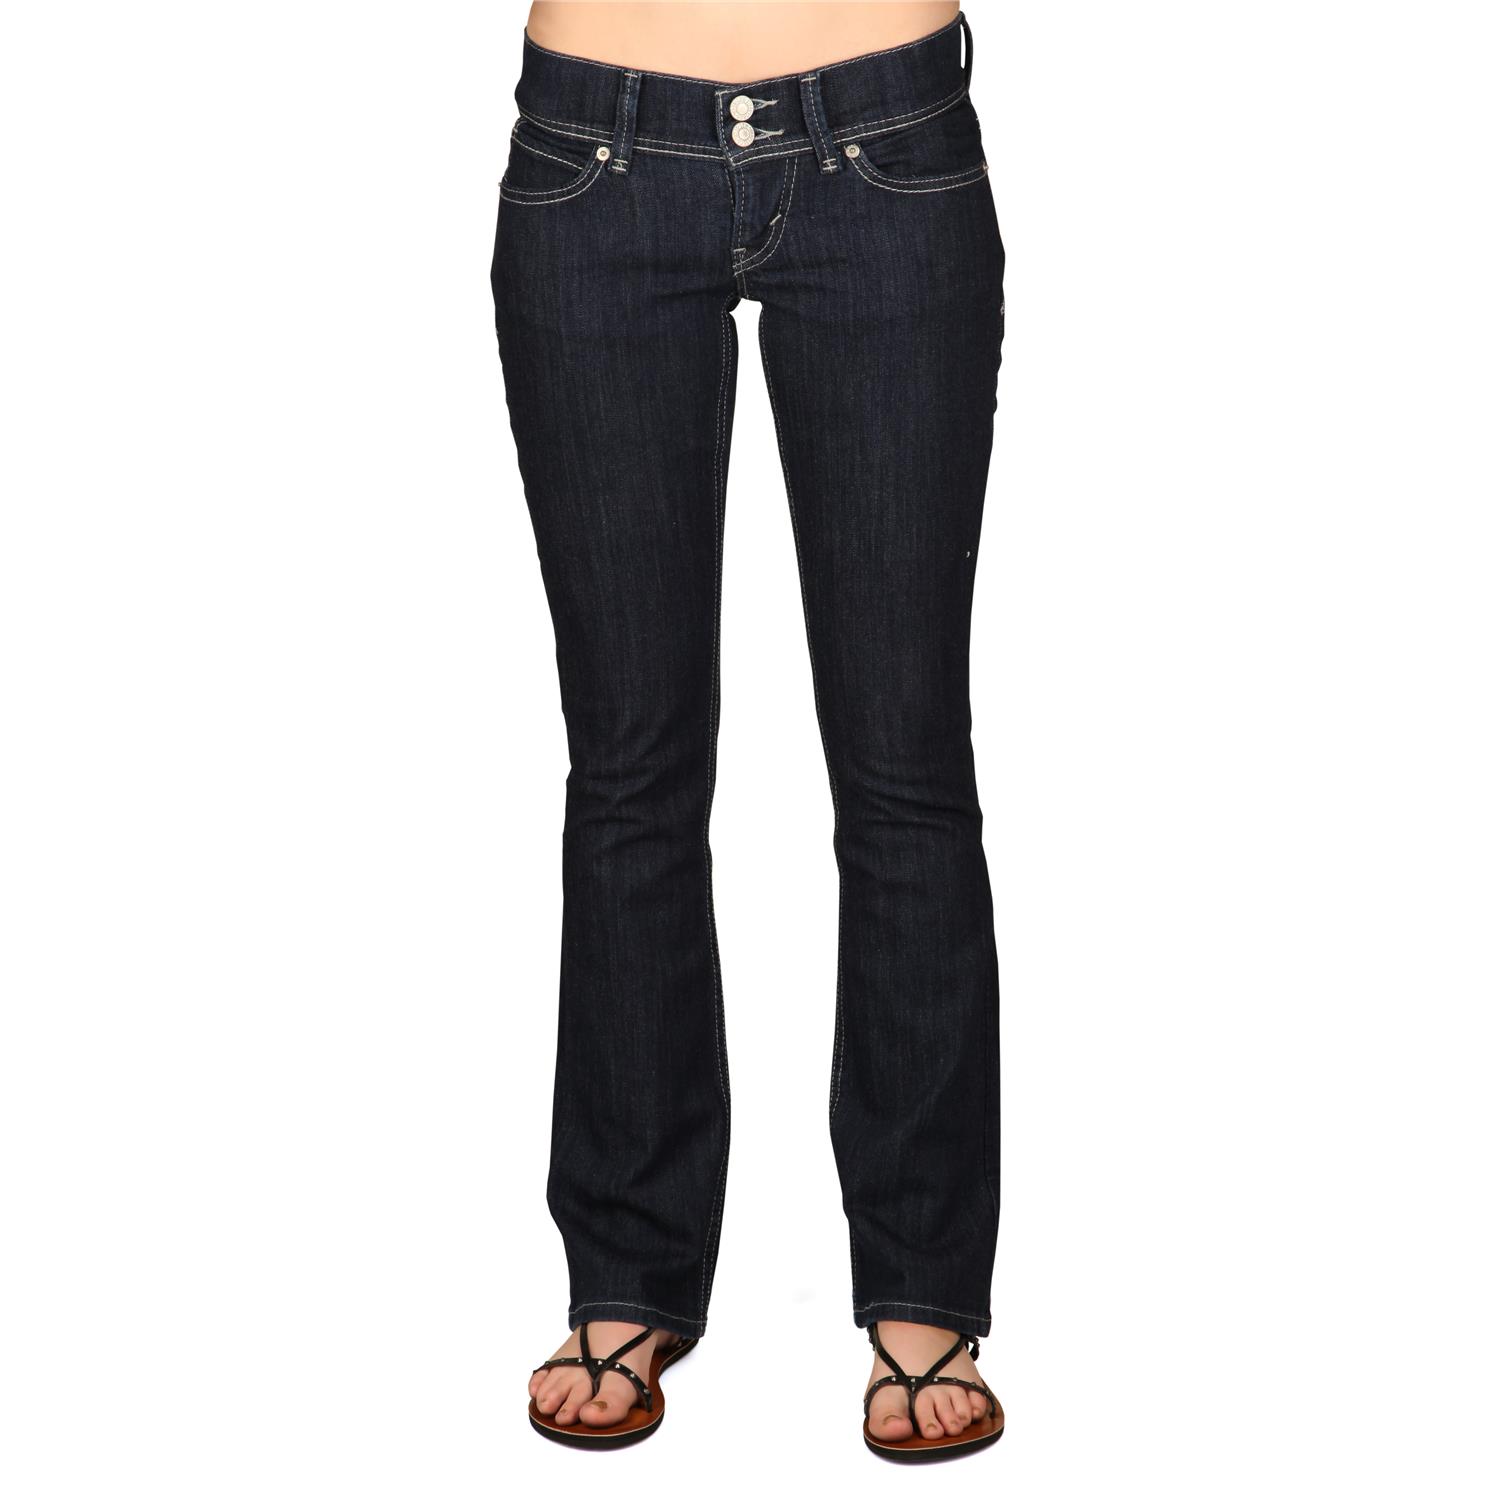 Levi's 524 Styled Skinny Boot Red Tab Jeans - Women's | evo outlet